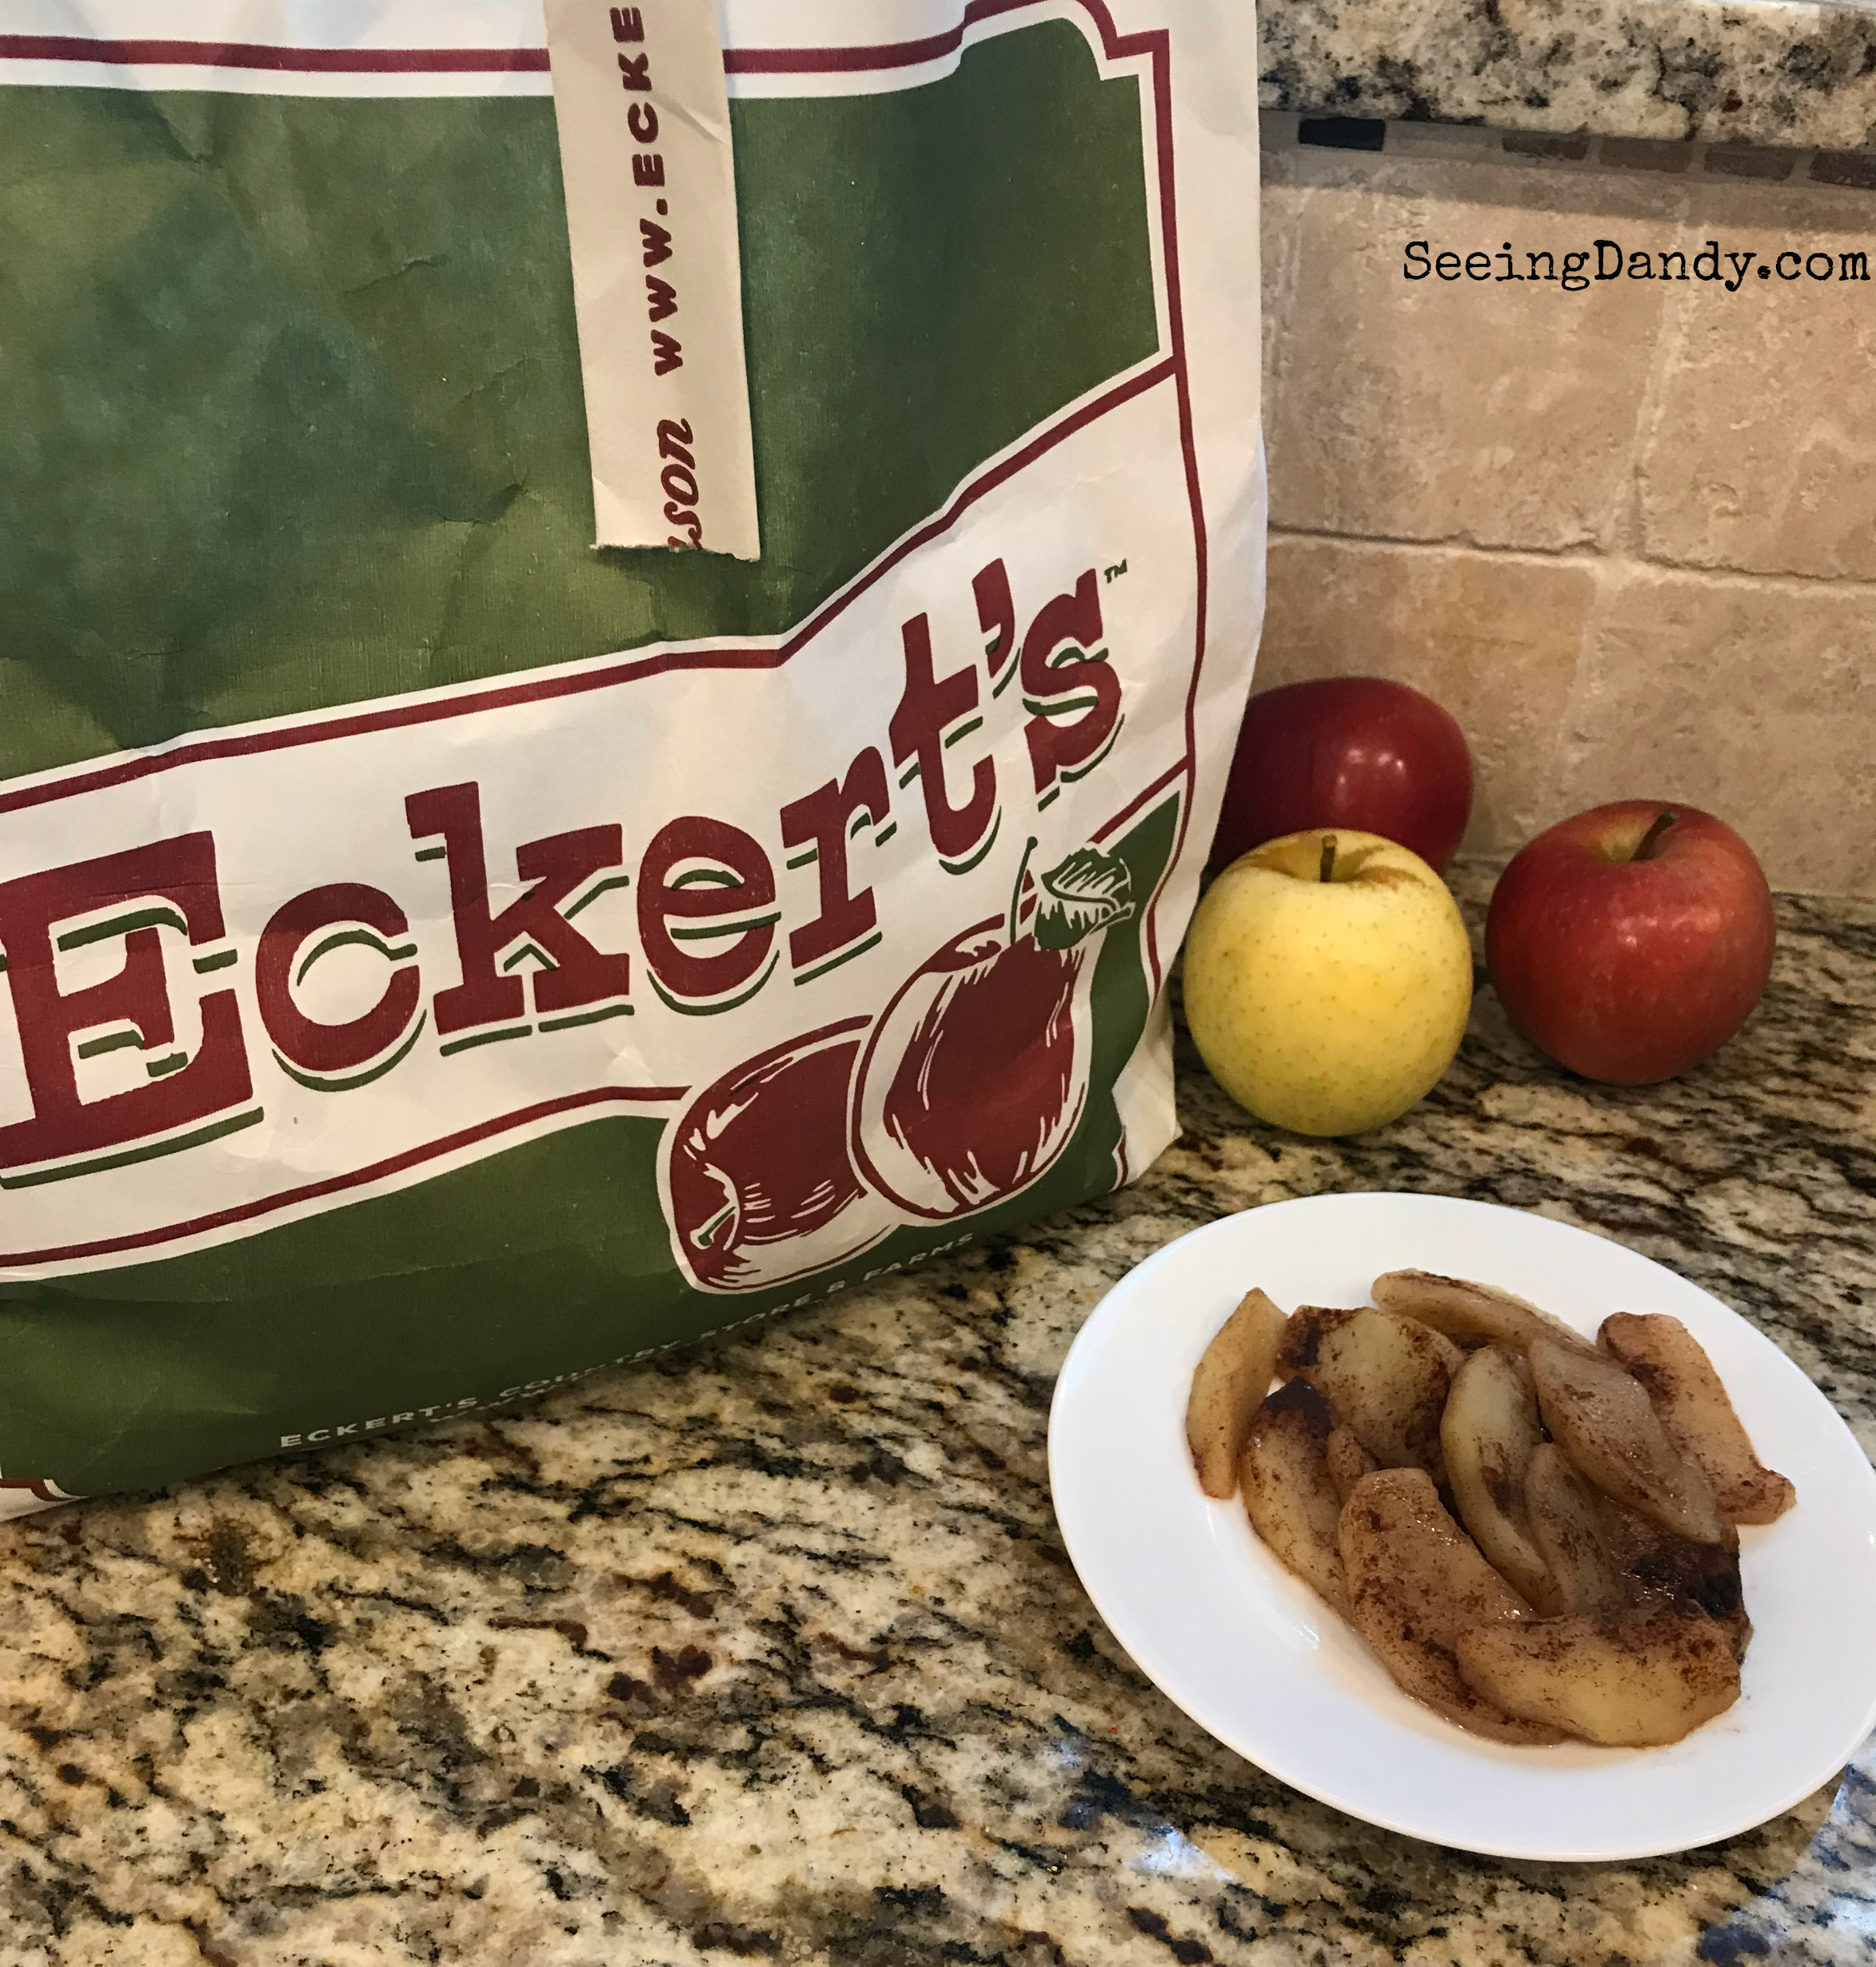 Eckert's orchard bag in the kitchen. Delicious foil baked apples finished and flavored with cinnamon on granite counter top. 